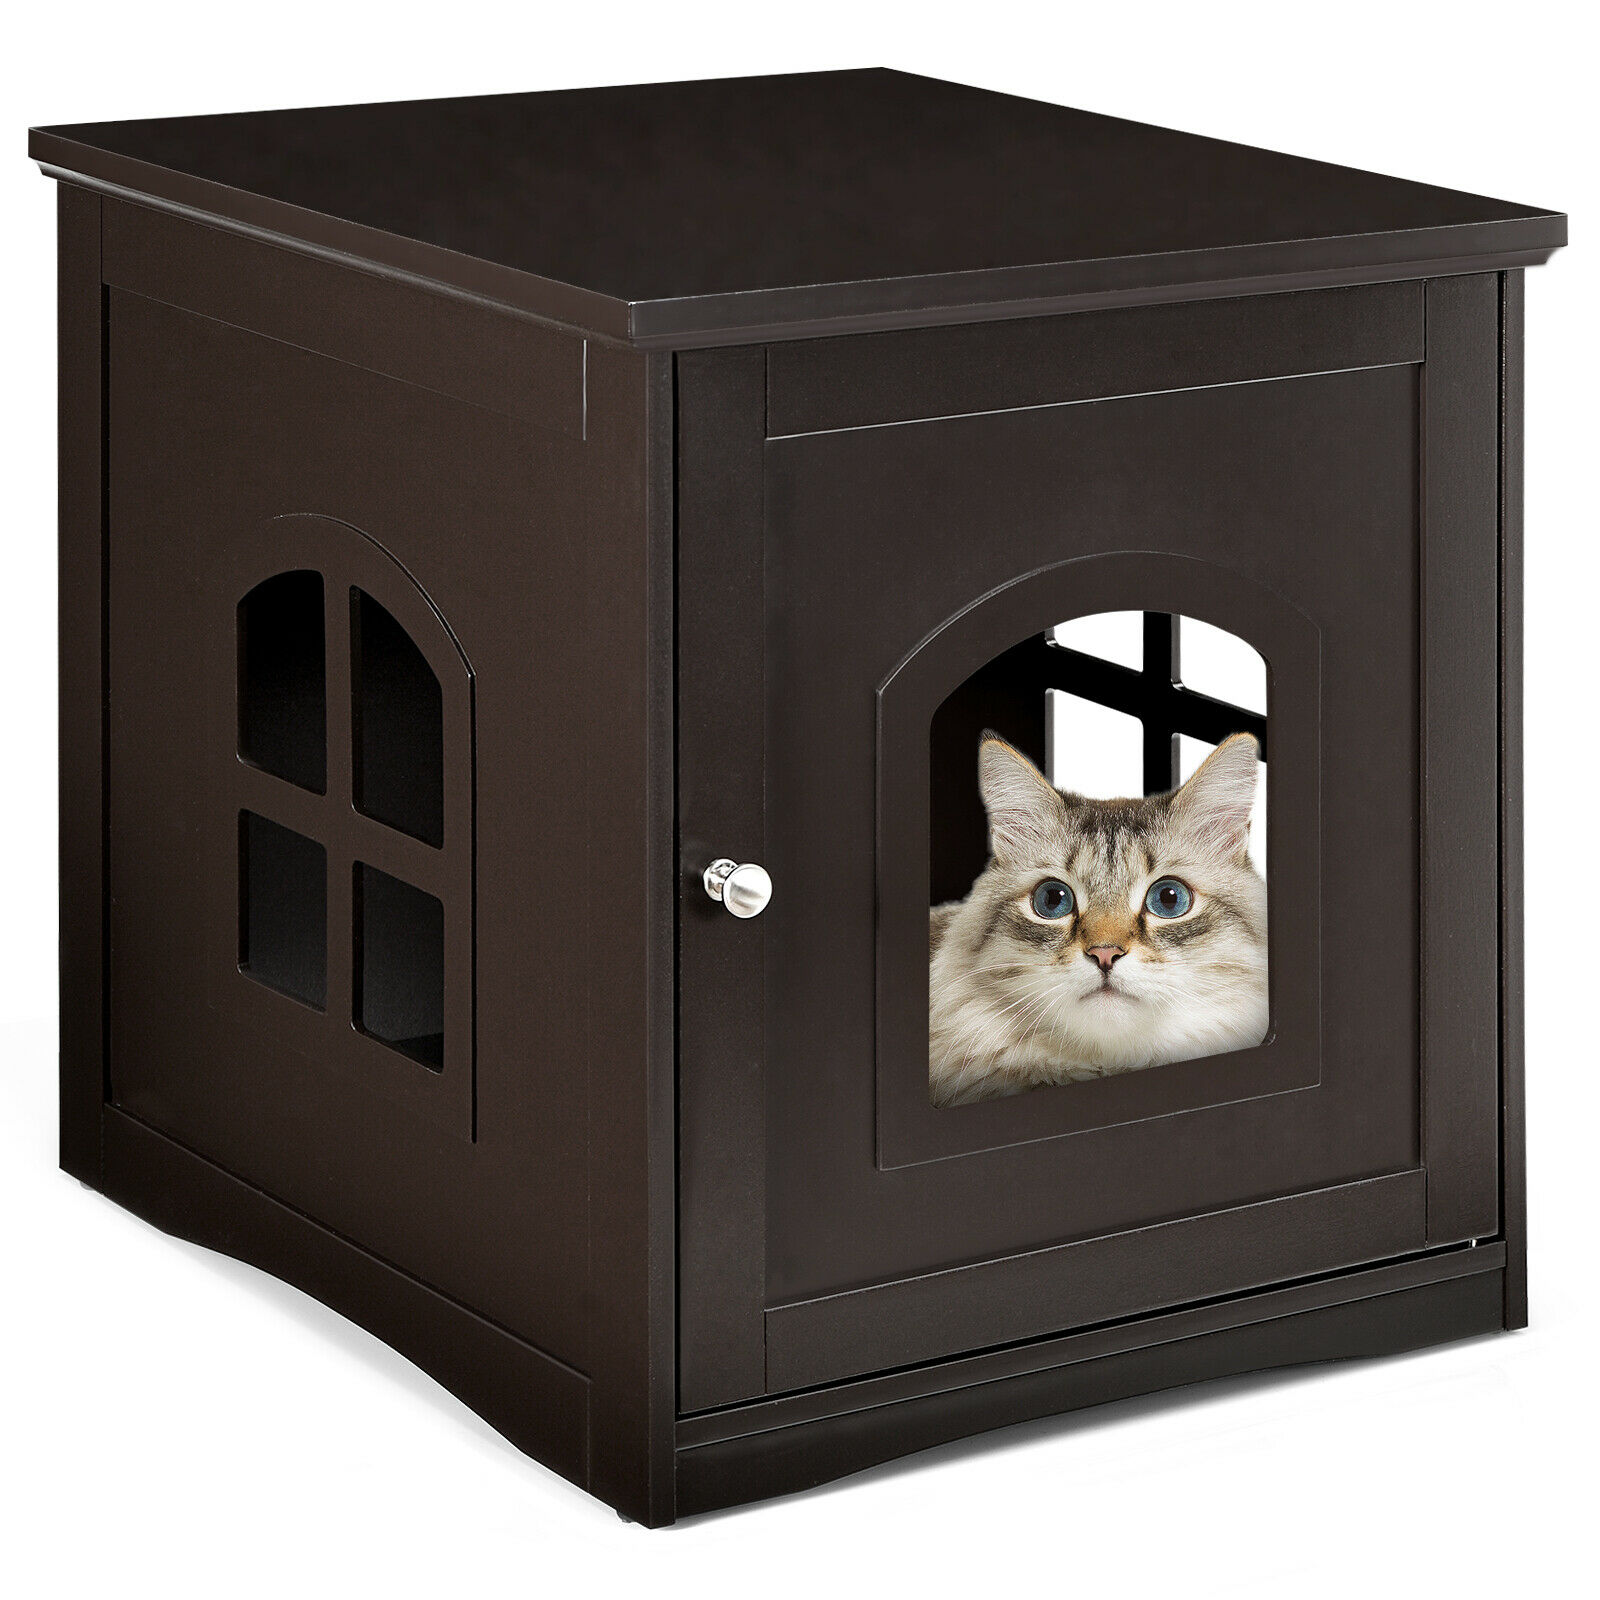 Decorative Cat House Side Table with Window